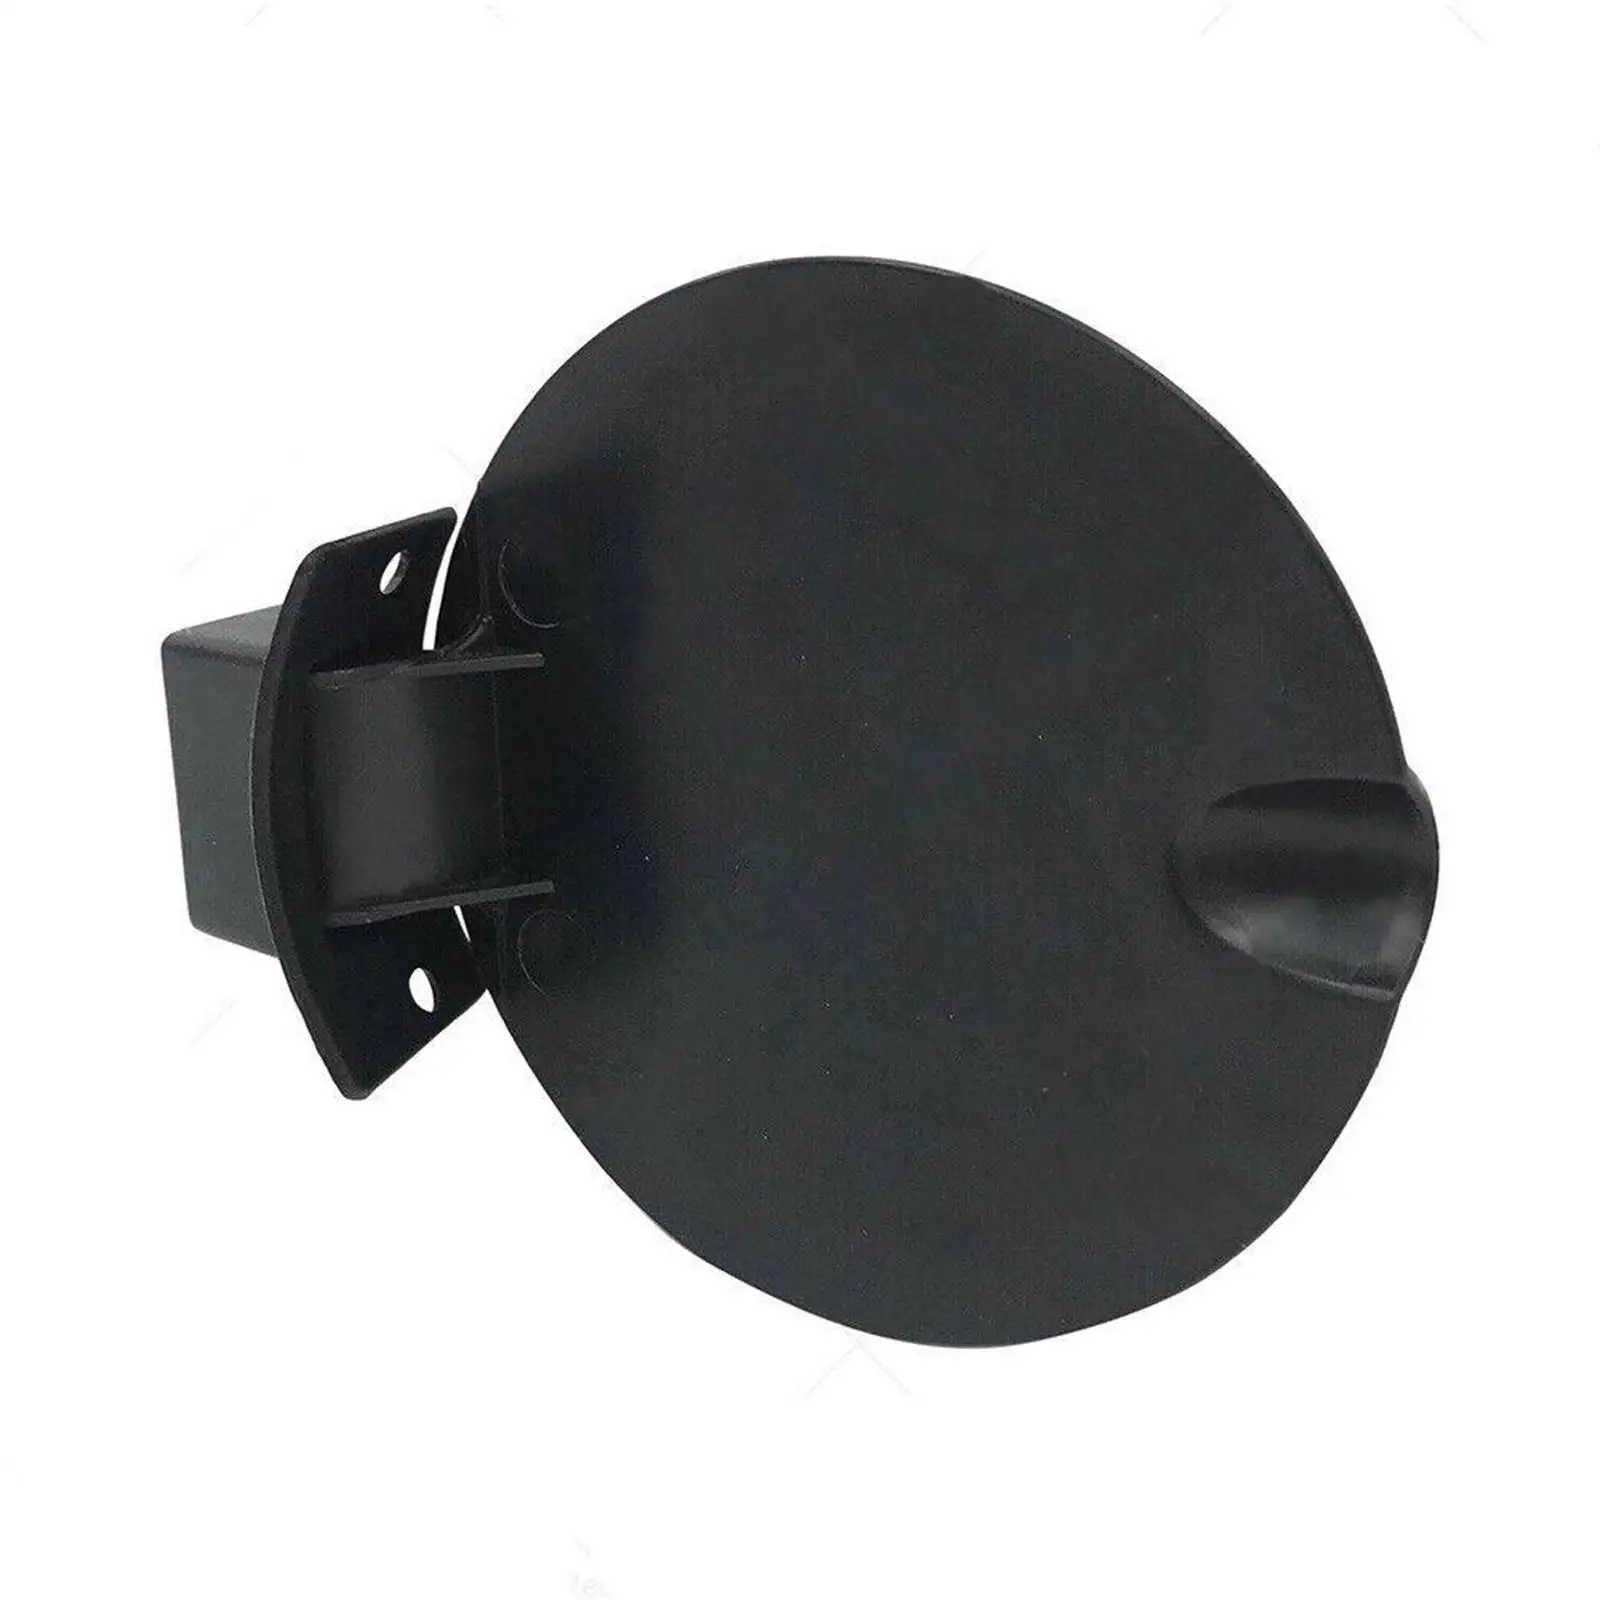 Fuel Filler Cap Car Accessories Repair Fuel Filler Flap Cover Lid for Holden 2000 to 2007 Commodore Ute Replacement